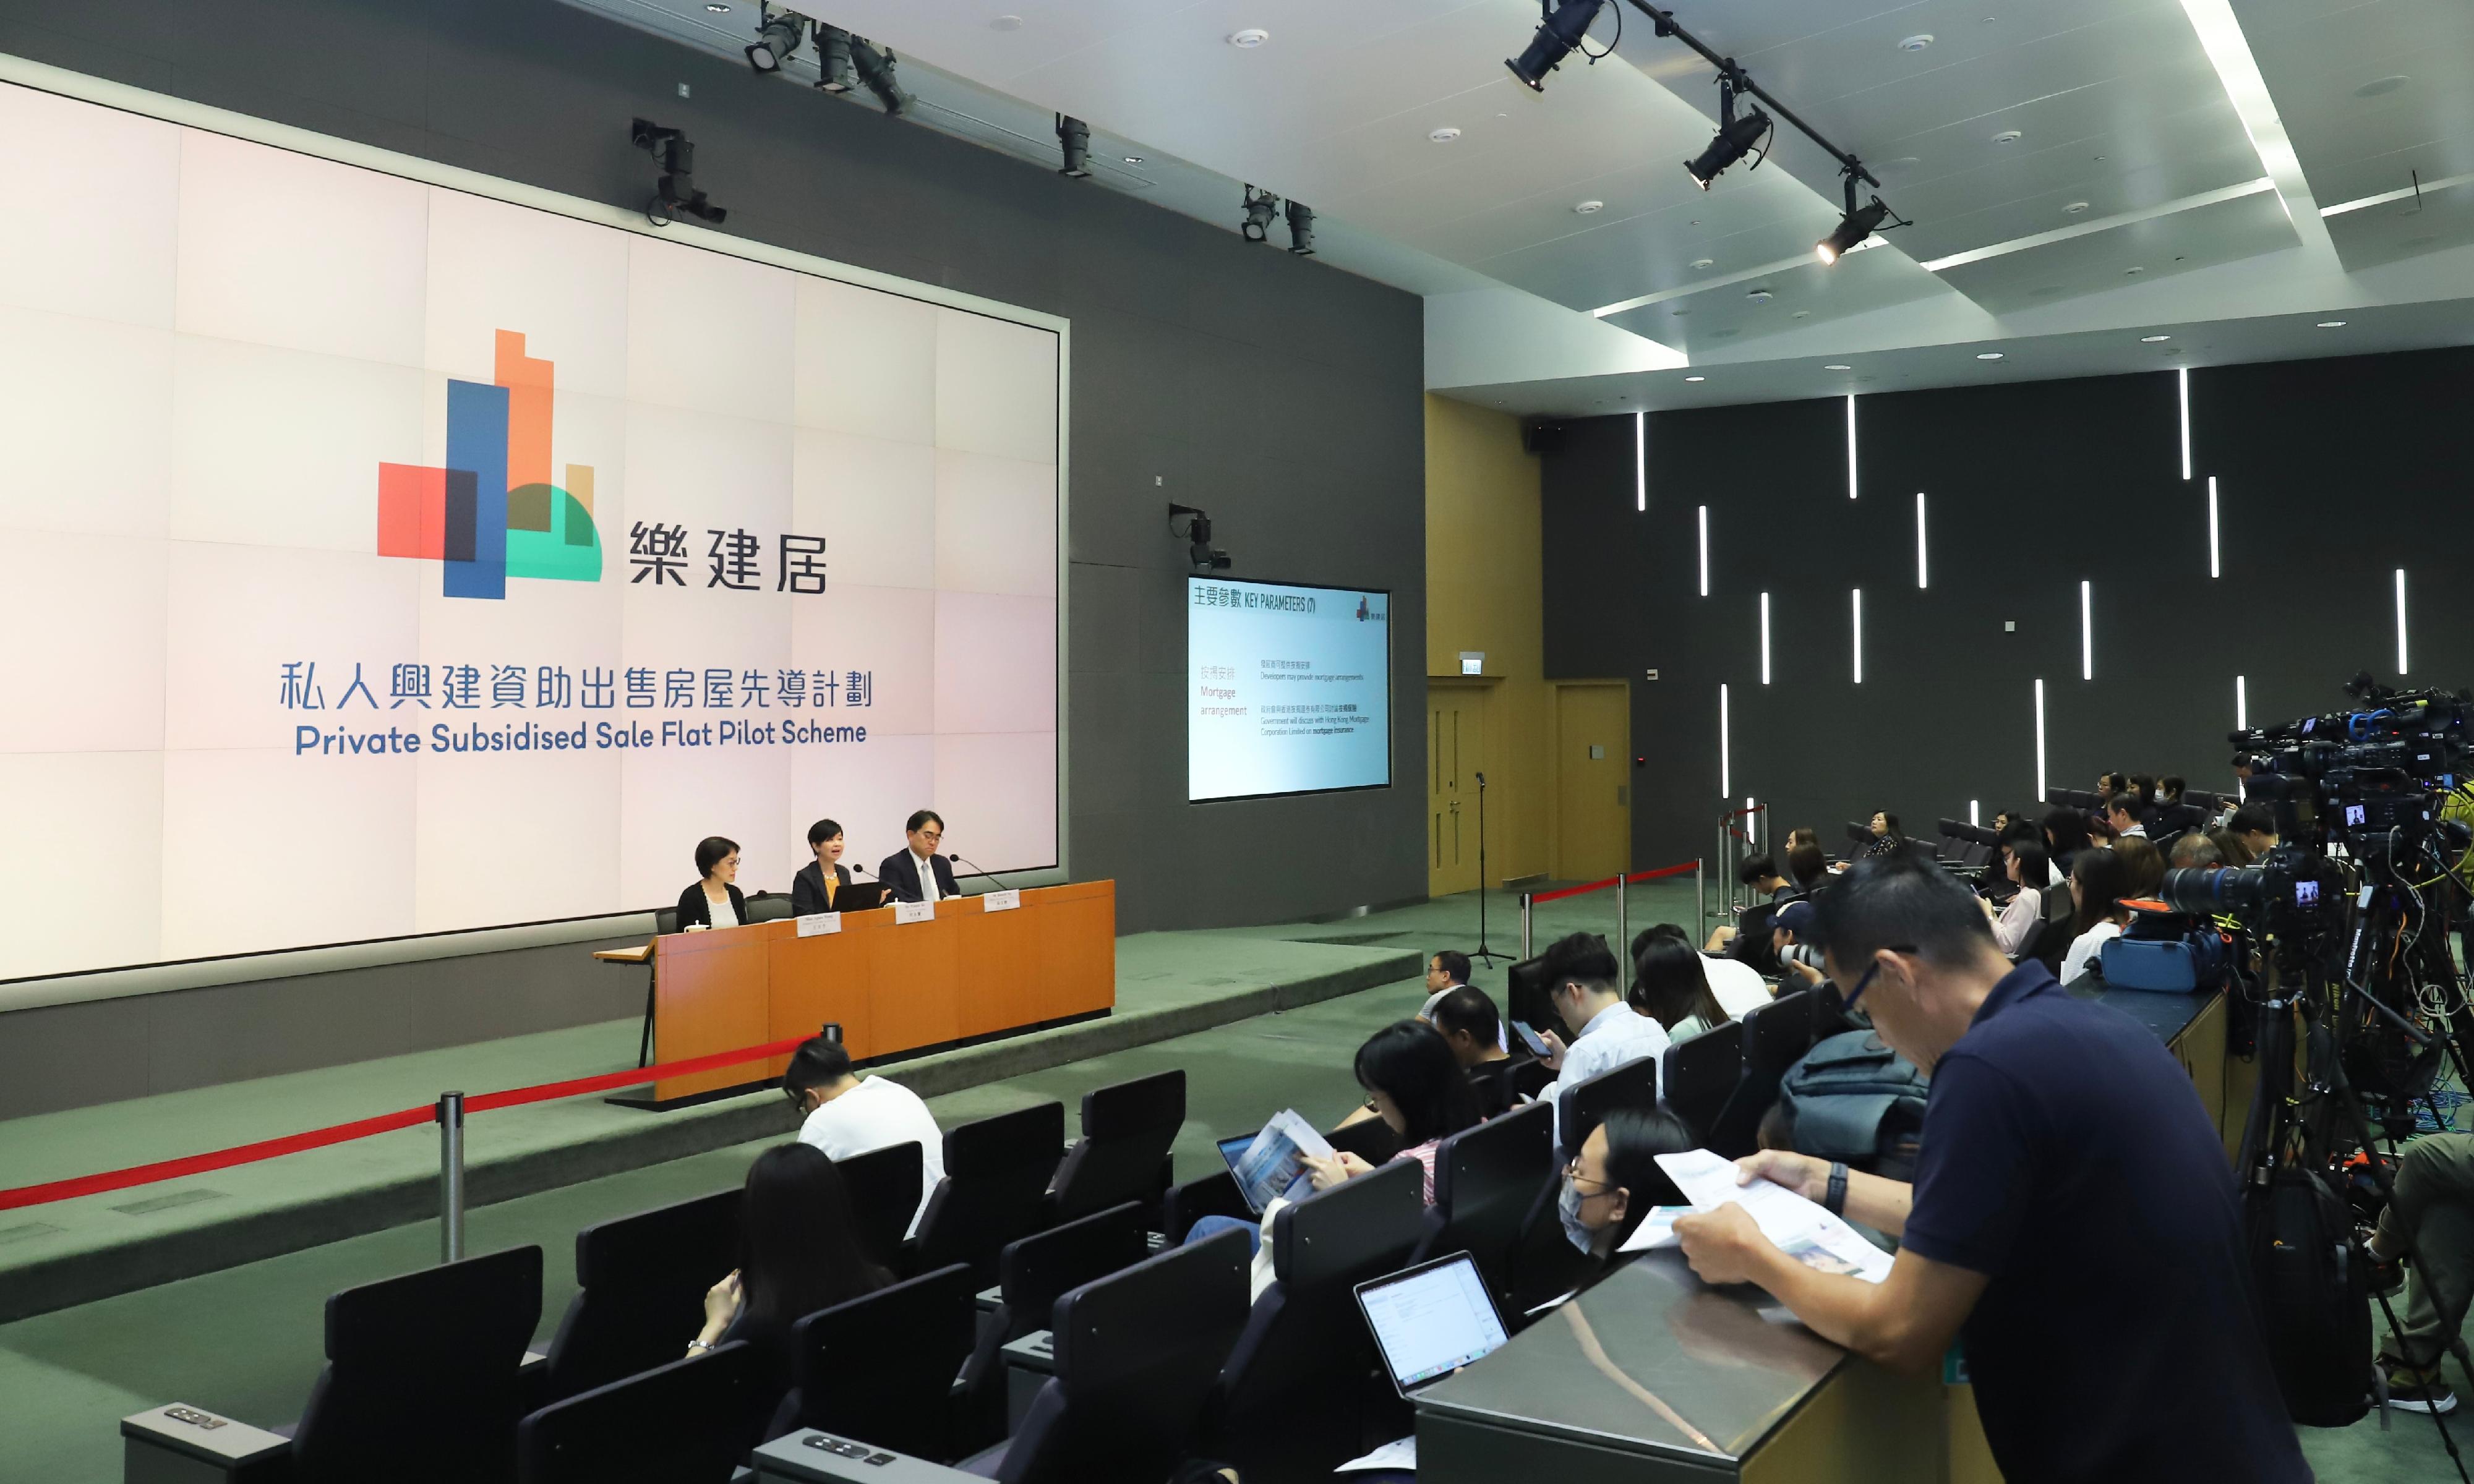 The Housing Bureau held a press conference this afternoon (June 13) to announce the policy framework for the Private Subsidised Sale Flat - Pilot Scheme.